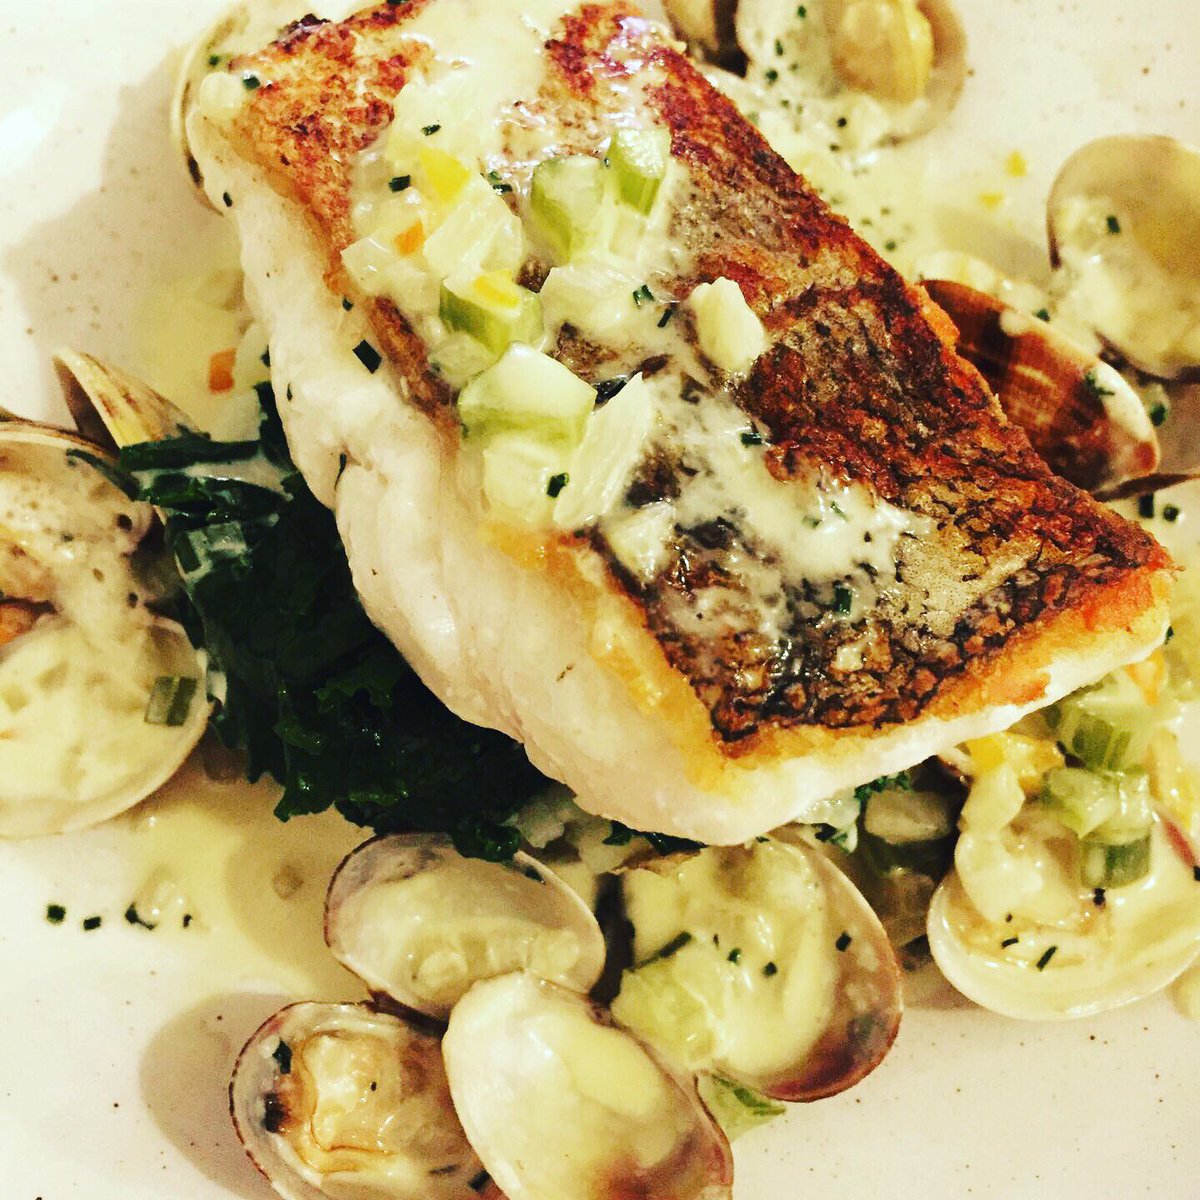 Pan roasted Hake, clams, kale, crushed new potatoes on the Pub menu, food is served all day everyday  12-9pm #GoodFood #Fresh #seasonal #GastroPub #Wiltshire #LogFires #Delicious @top50gastropubs @aahospitality @michelinguide @wiltshirelifemag